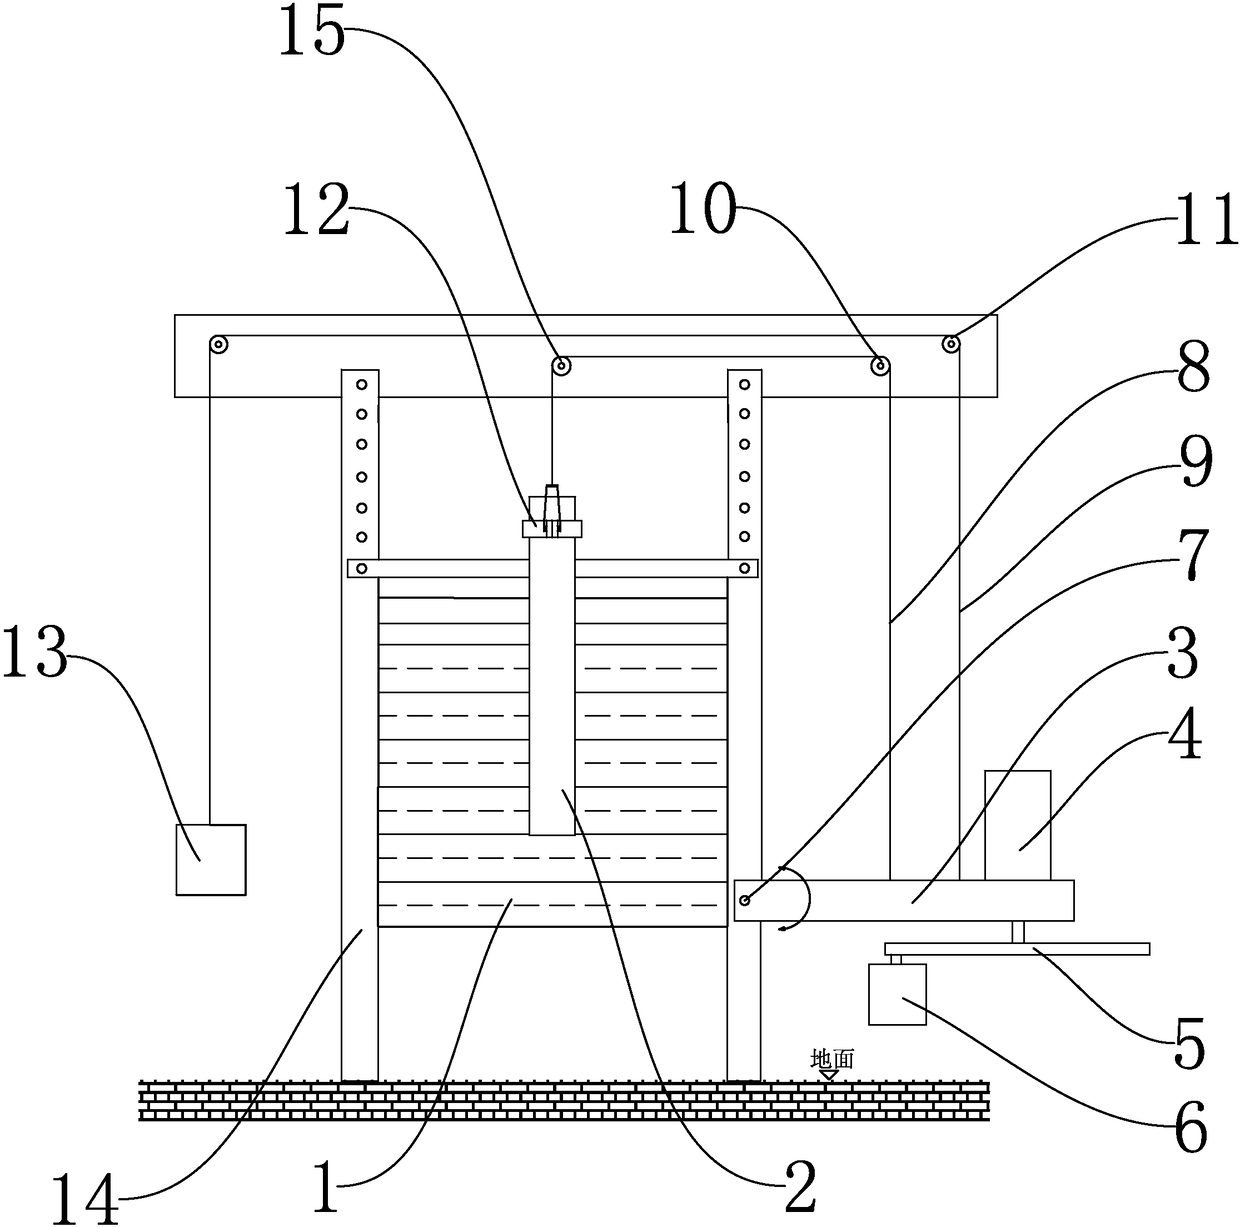 A variable frequency vertical cyclic loading device that can apply complex load forms